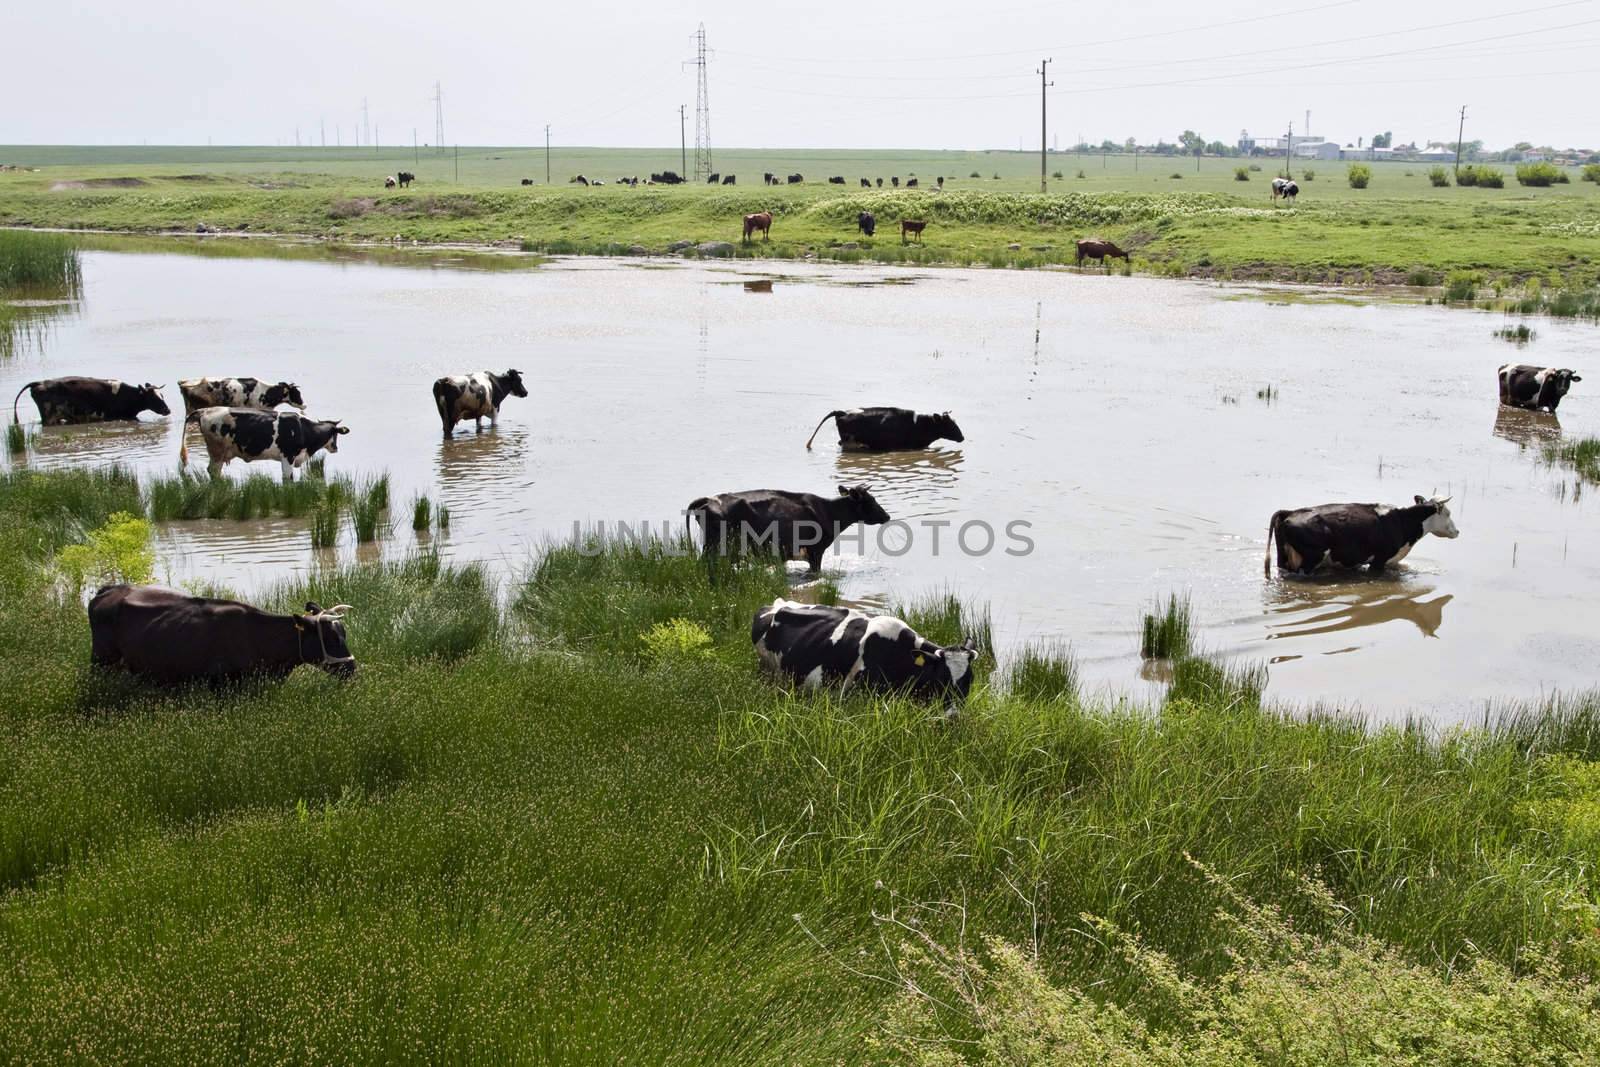 a group of cows is crossing a pond in the summer heat